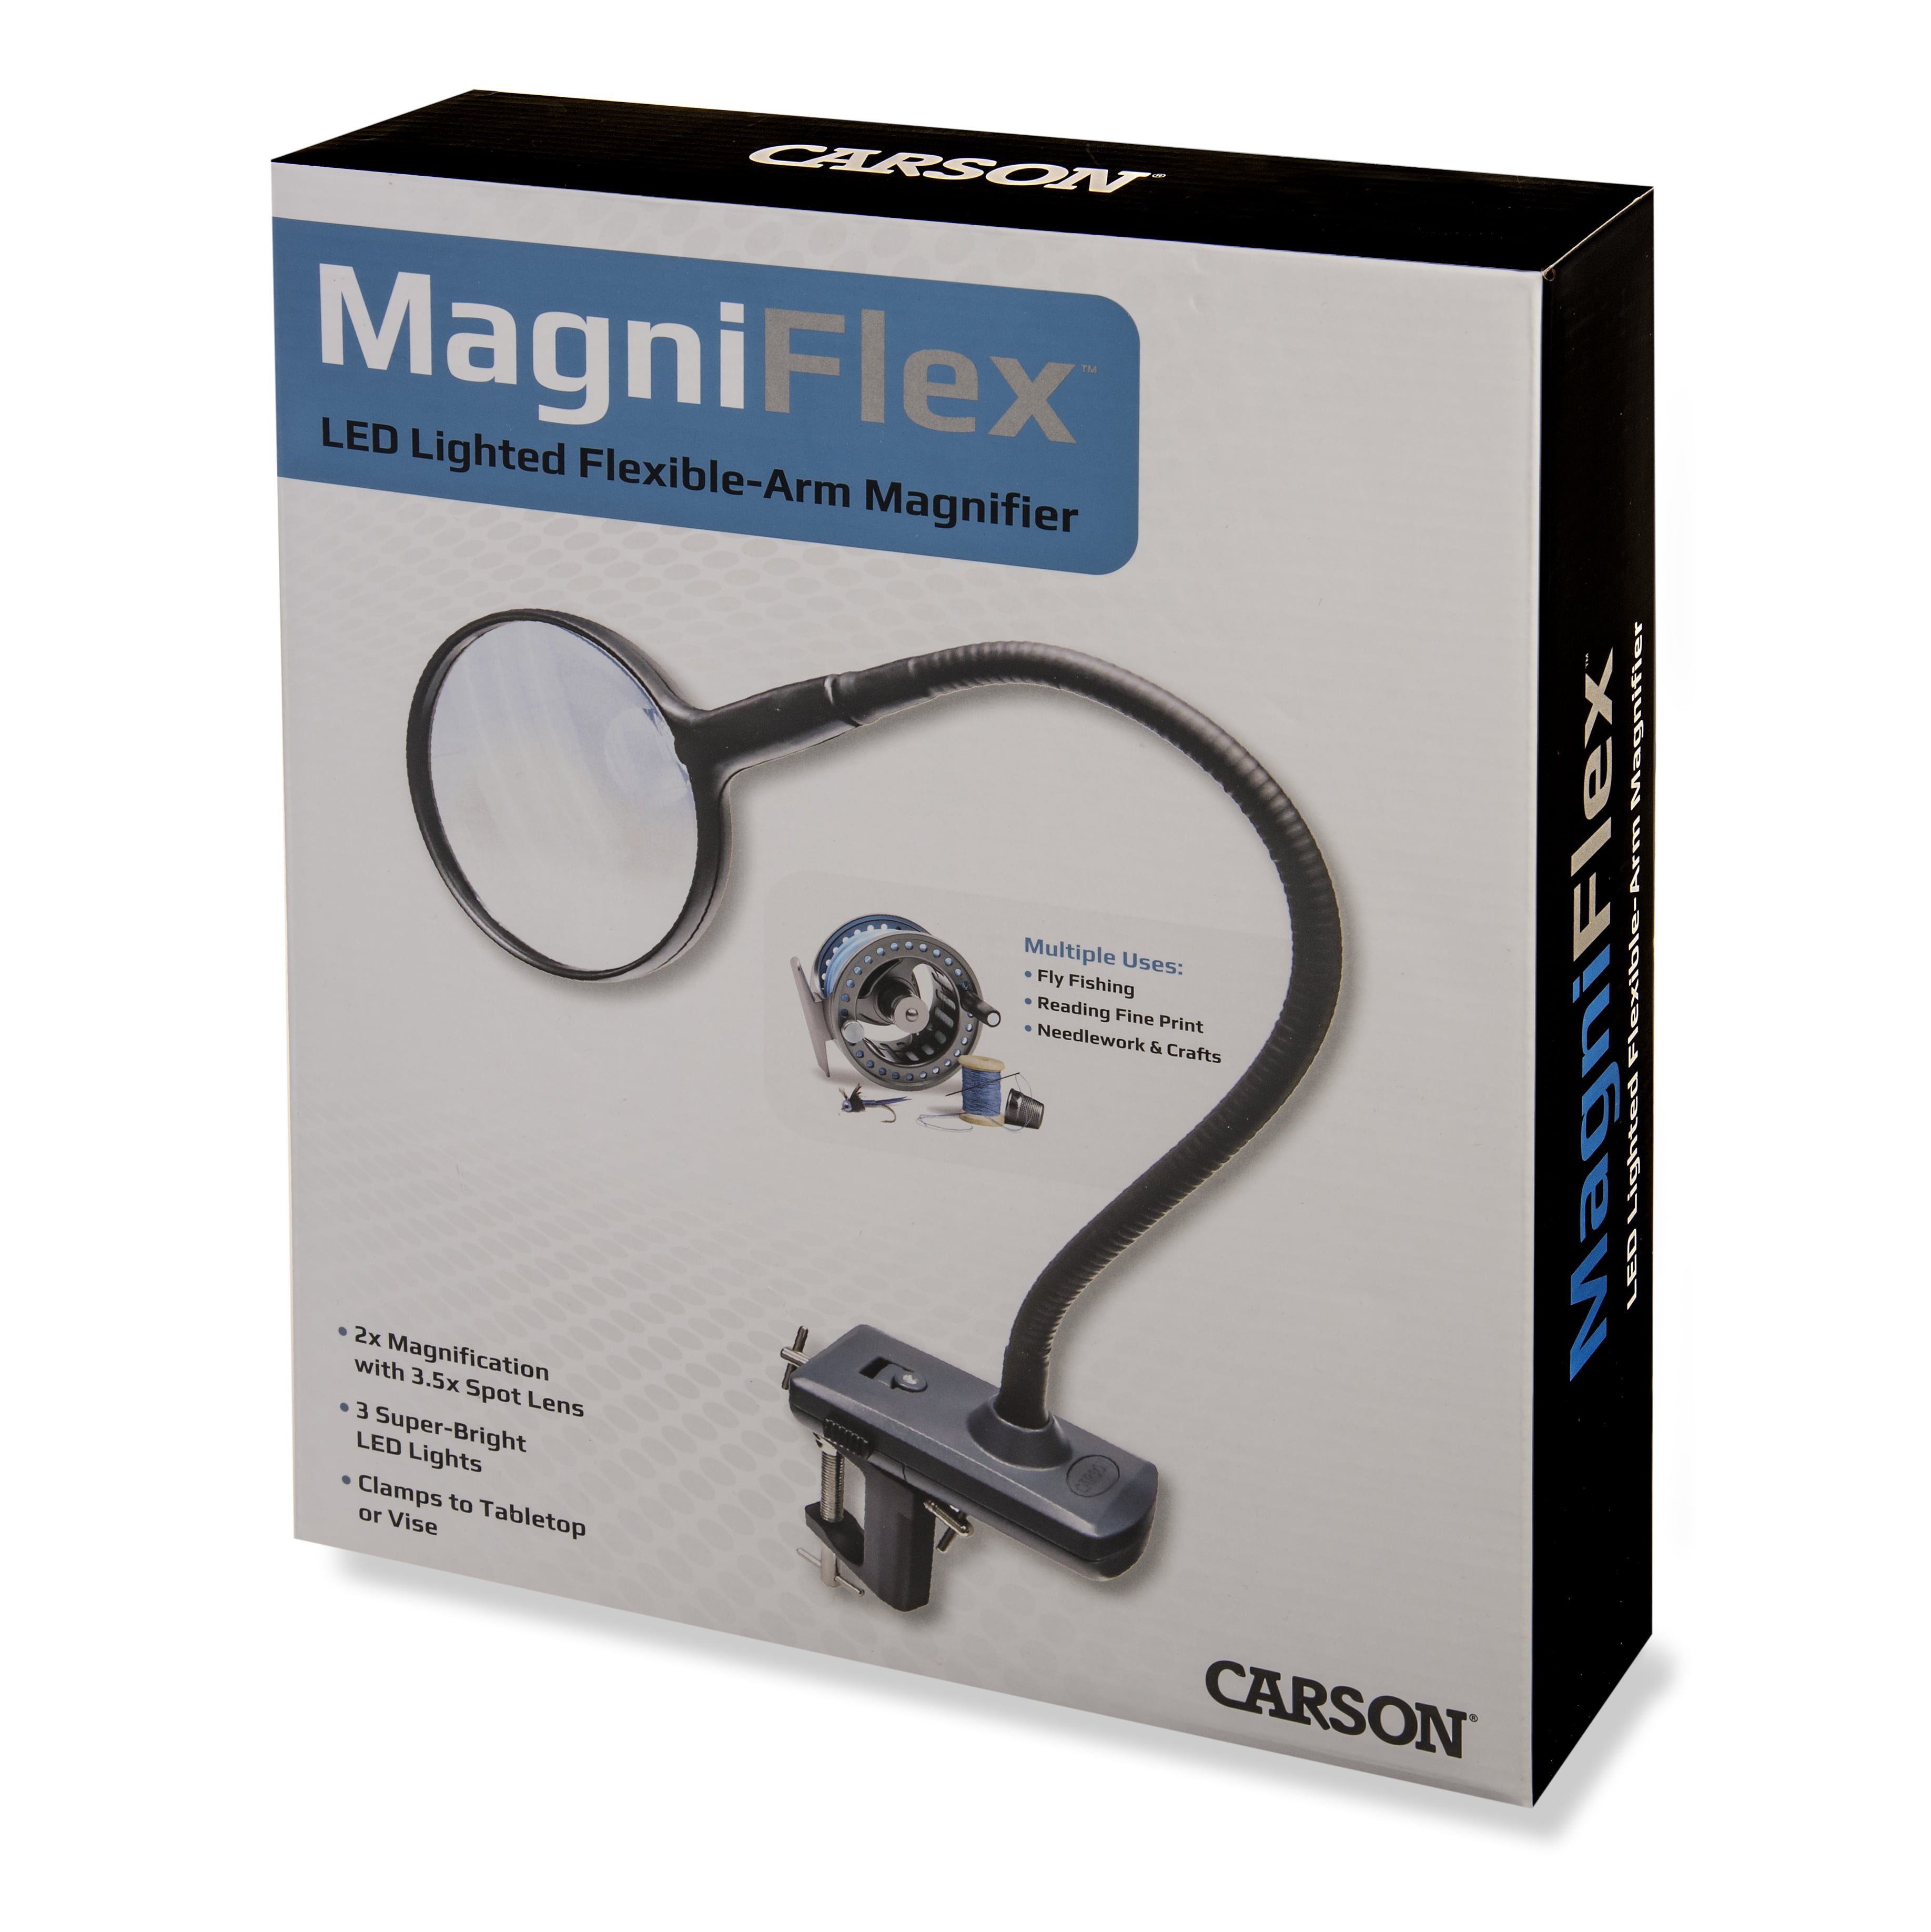 Carson Freehand LED Lighted Hands Free Magnifier